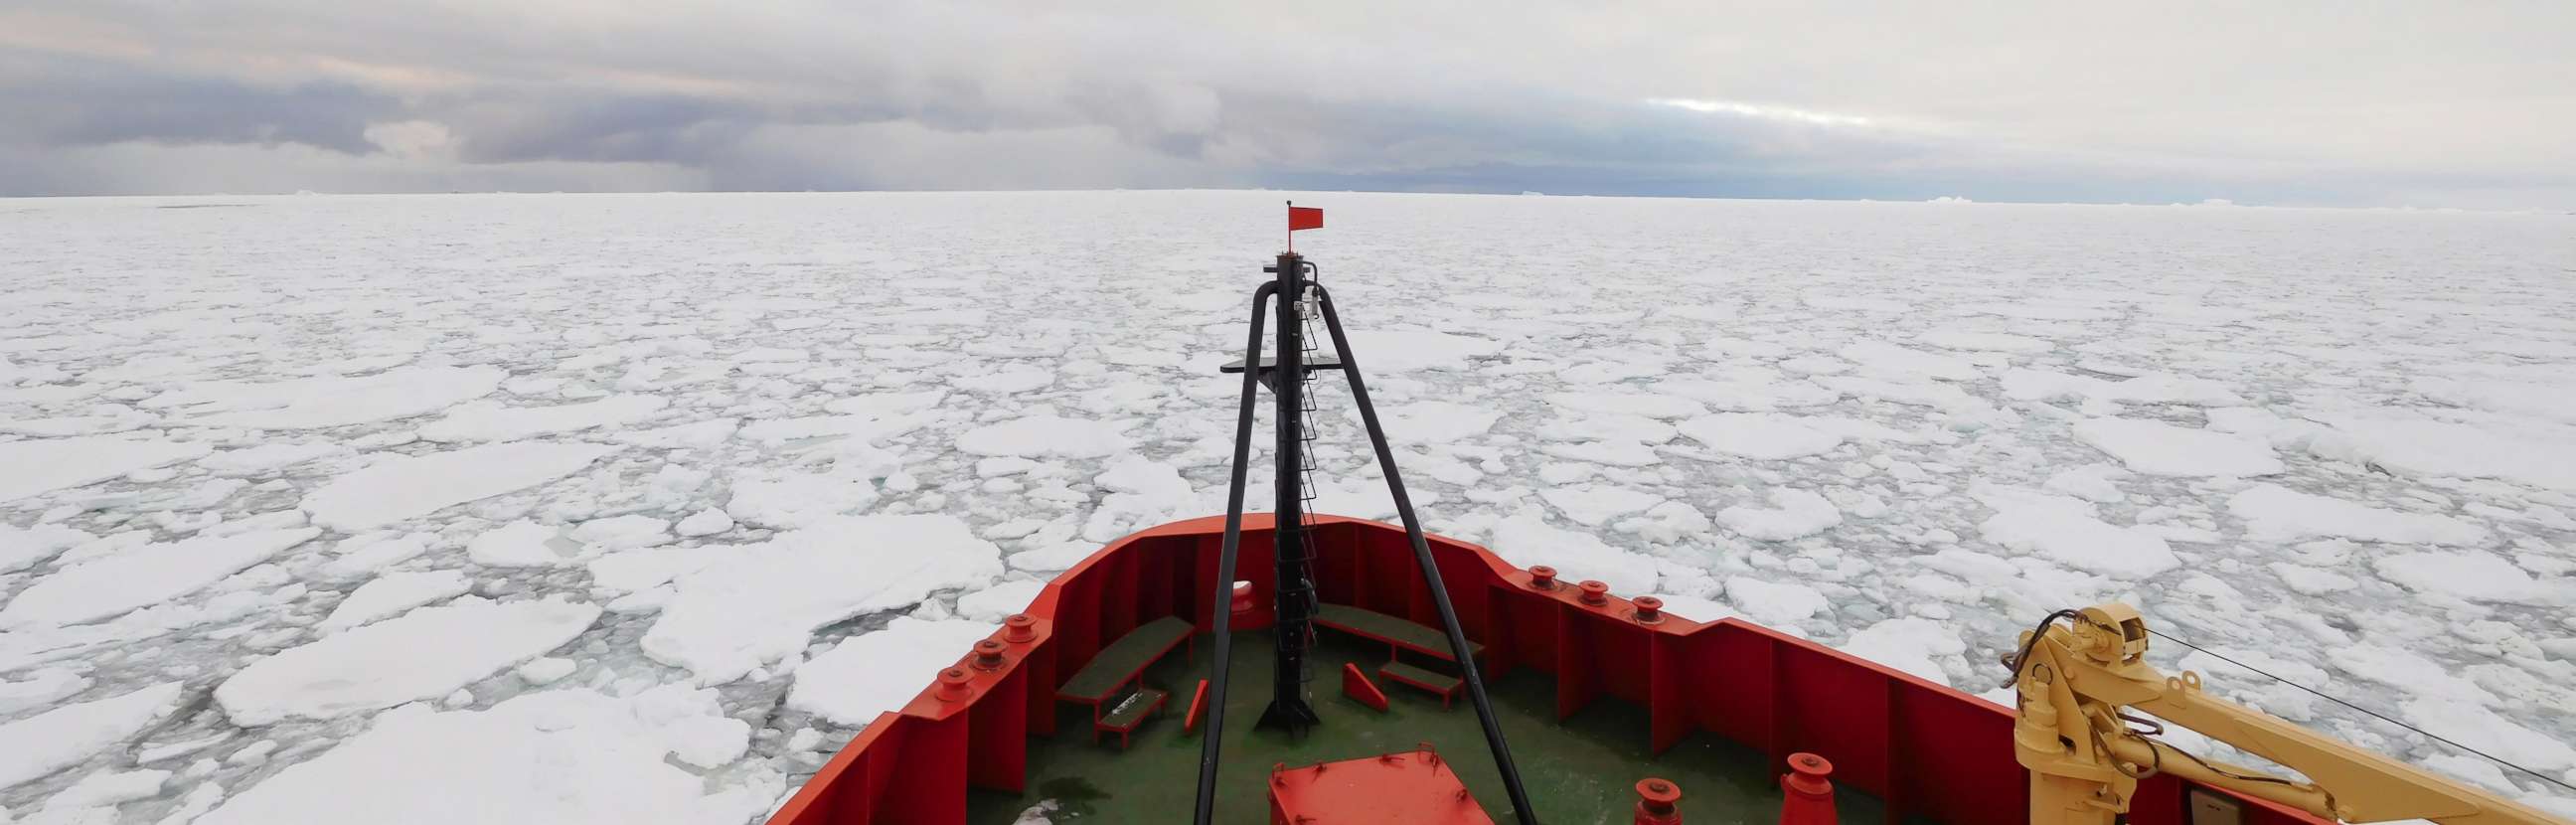 PHOTO: The Laurence M. Gould research vessel, seen in a file image, was unable to reach a team of U.S. researchers stuck on an ice-bound island off Antarctica's coast, the National Science Foundation said, March 10, 2018.